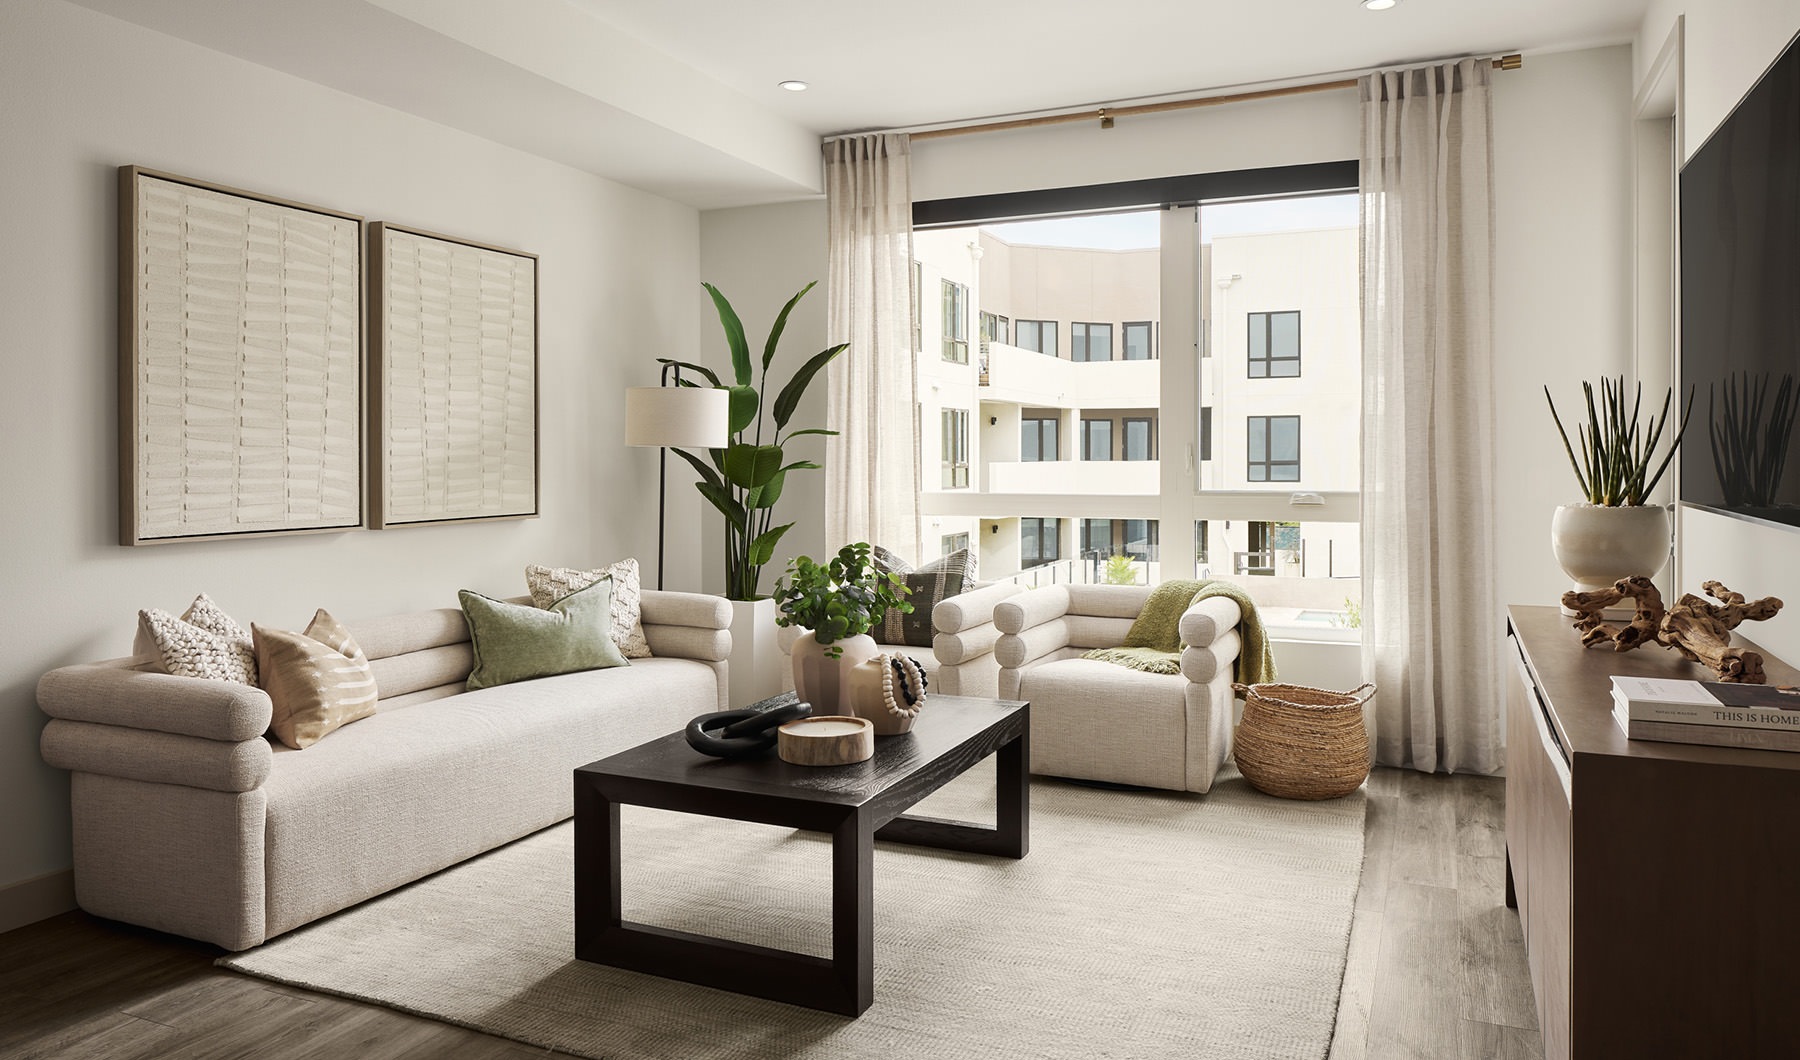 bright, open concept apartment interiors with over sized windows